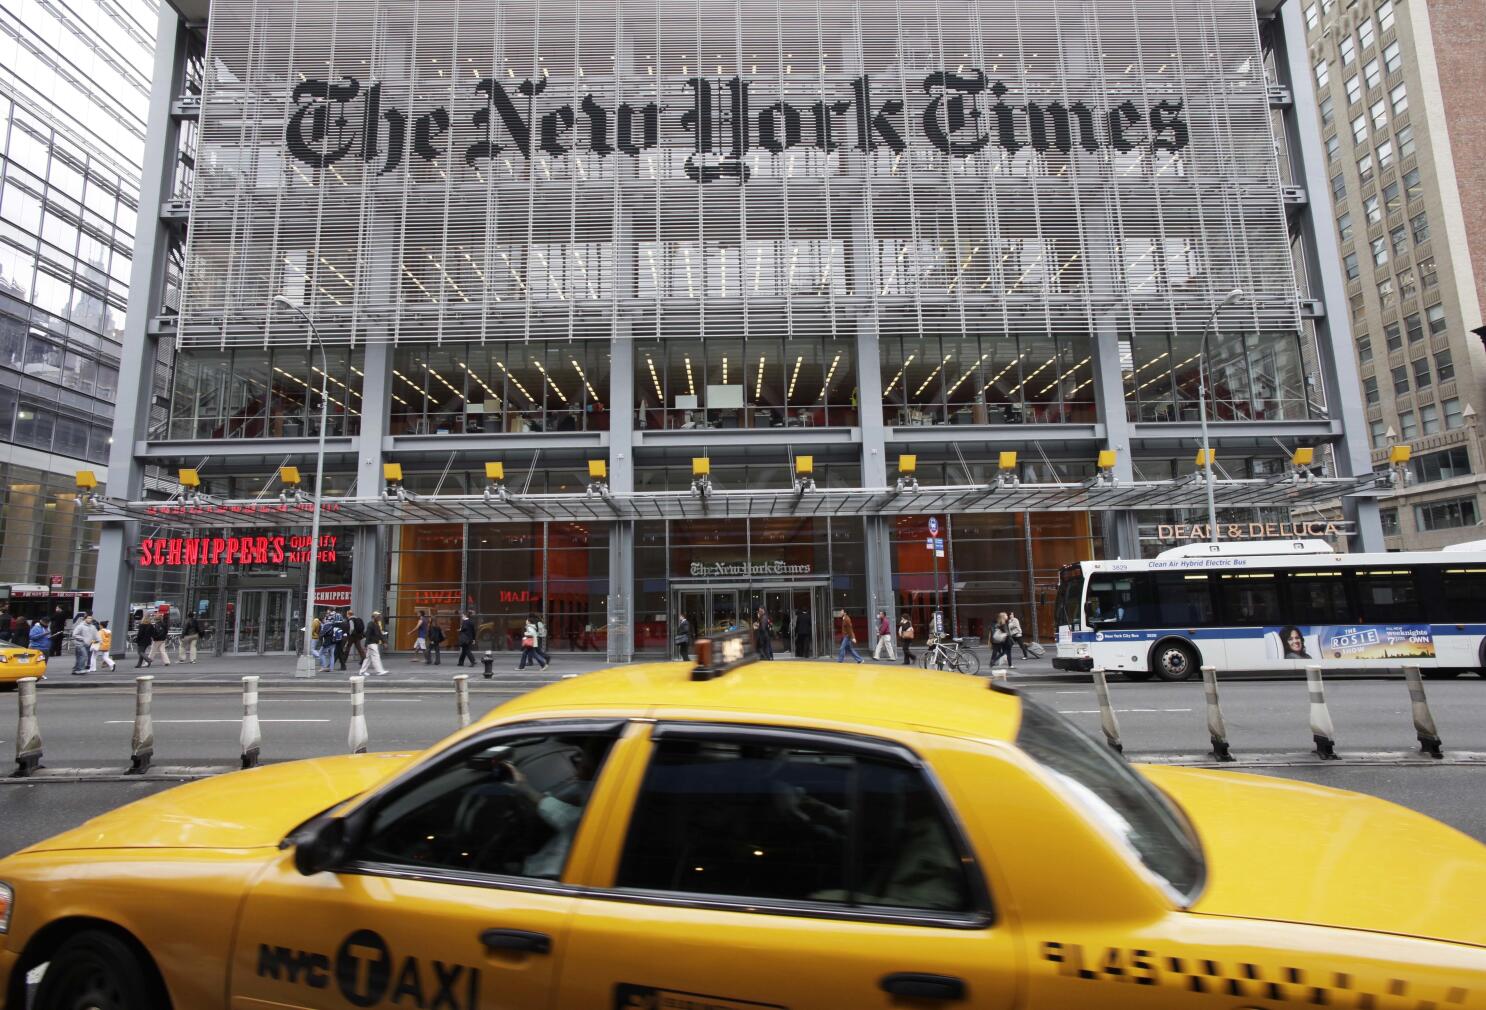 New York Times buys popular word game Wordle - BusinessToday